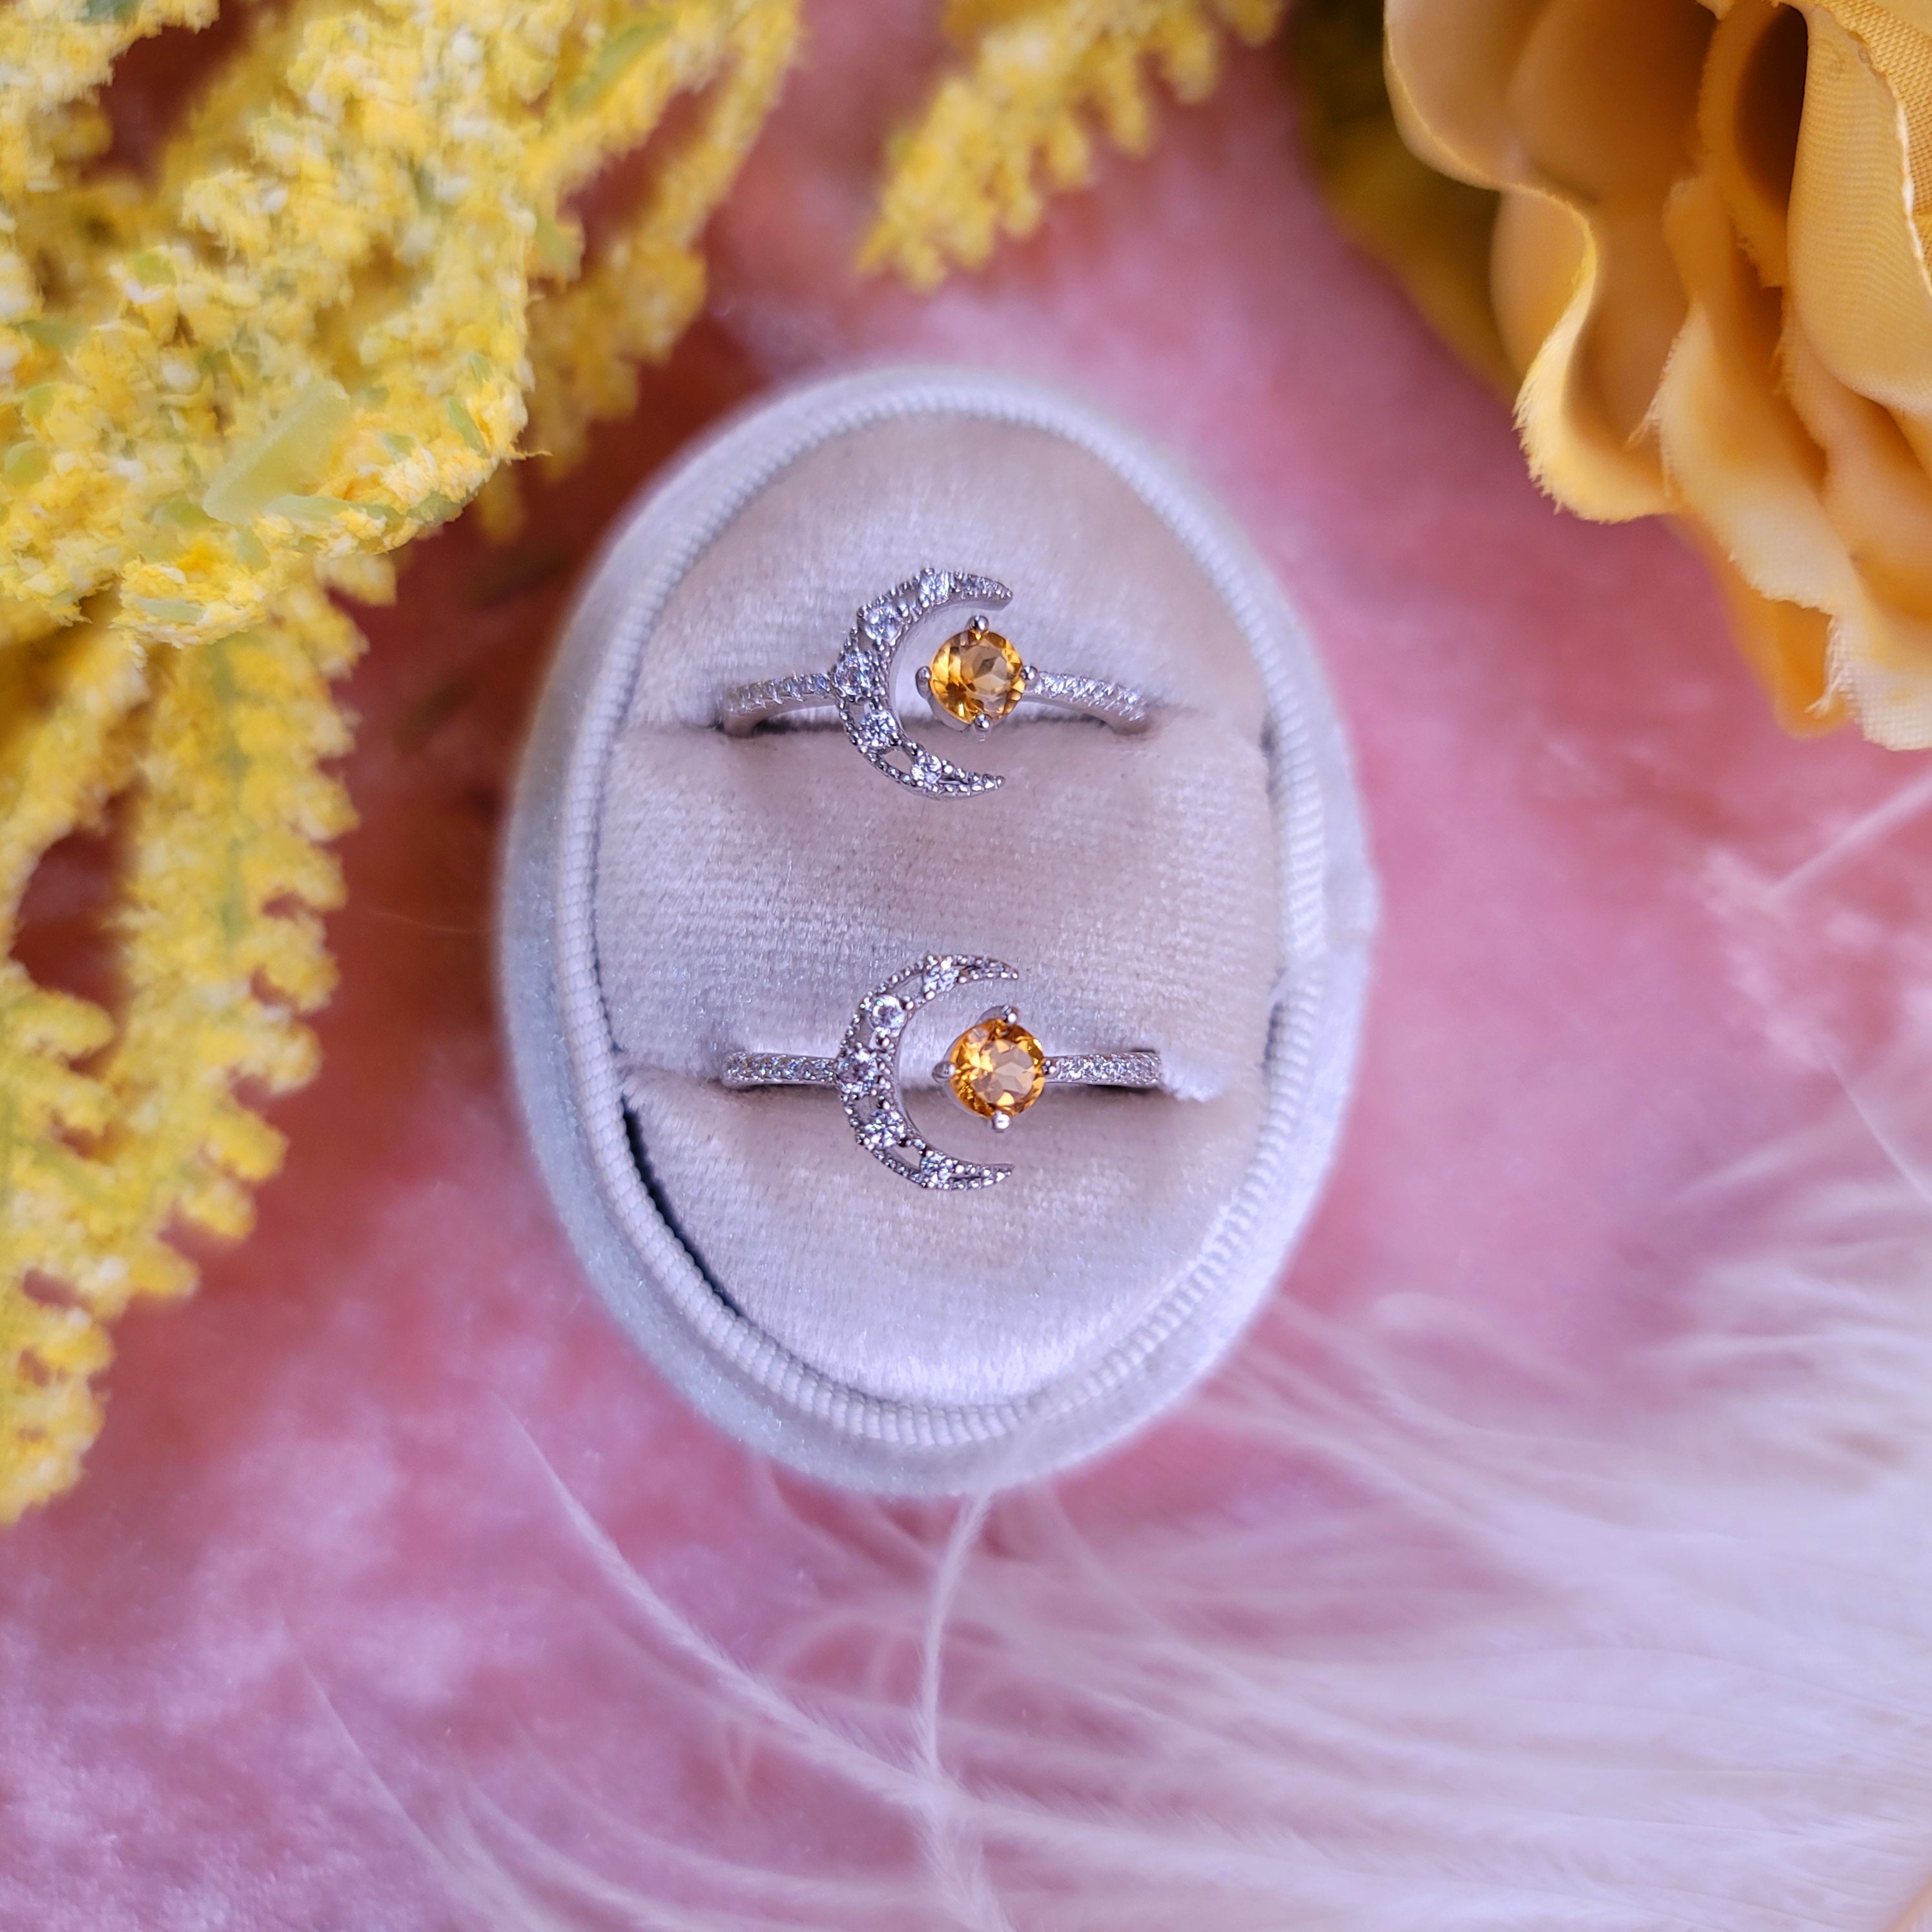 Citrine Magical Luna Adjustable Ring .925 Silver for Attracting Abundance, Good Luck and Positivity